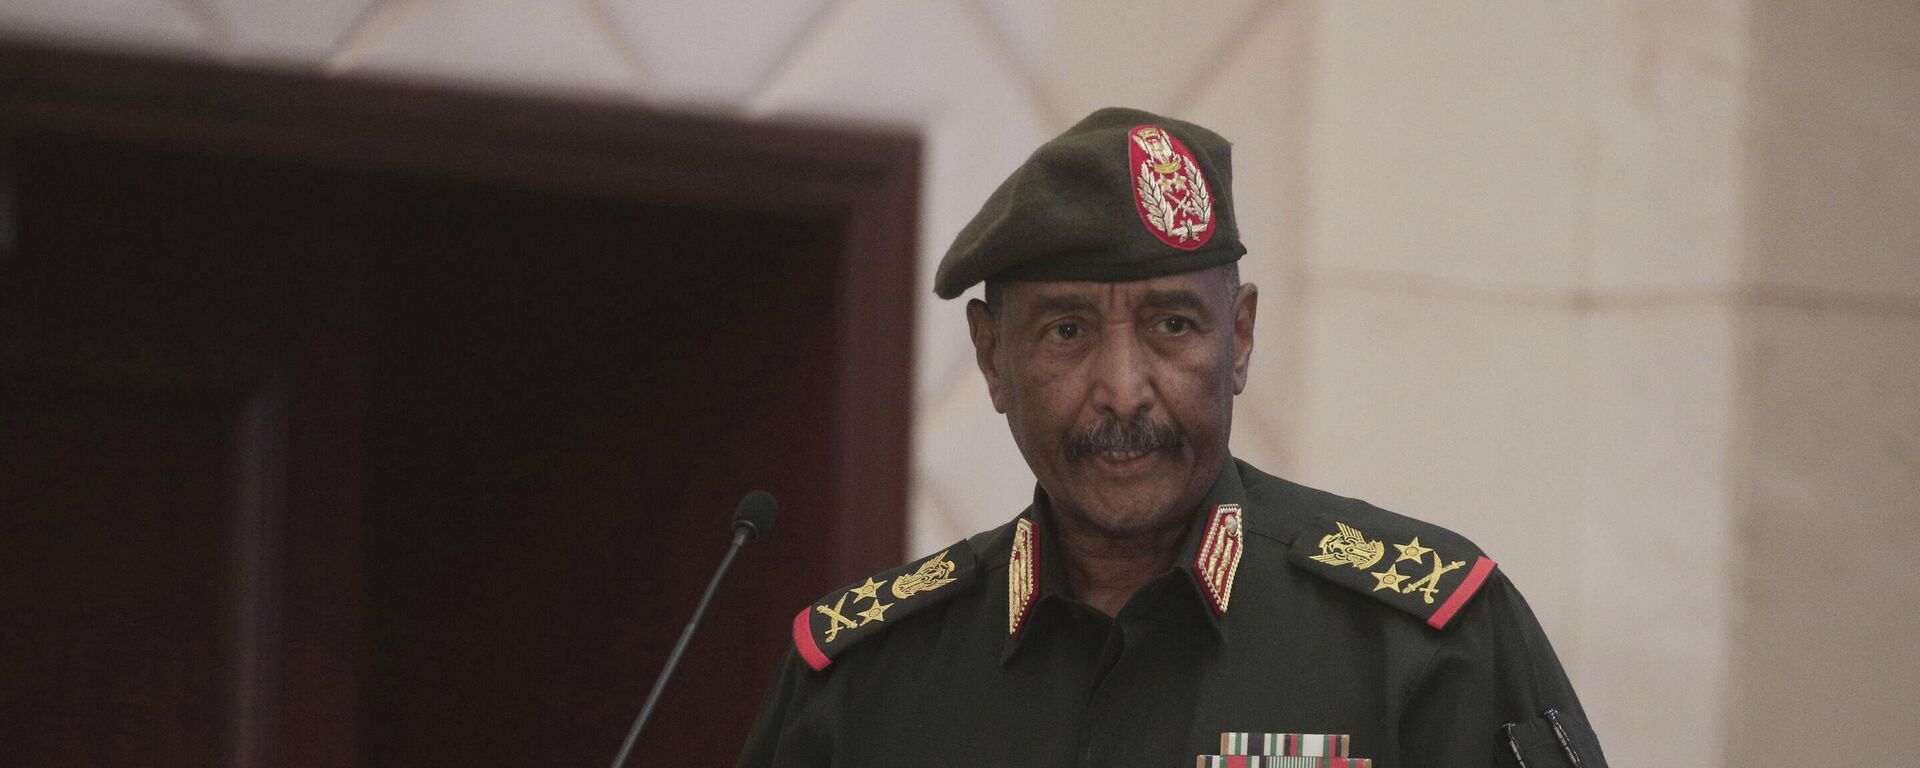 Sudan's Army chief Gen. Abdel-Fattah Burhan speaks following the signature of an initial deal aimed at ending a deep crisis caused by last year's military coup, in Khartoum, Sudan, Dec. 5, 2022 - Sputnik International, 1920, 20.04.2023